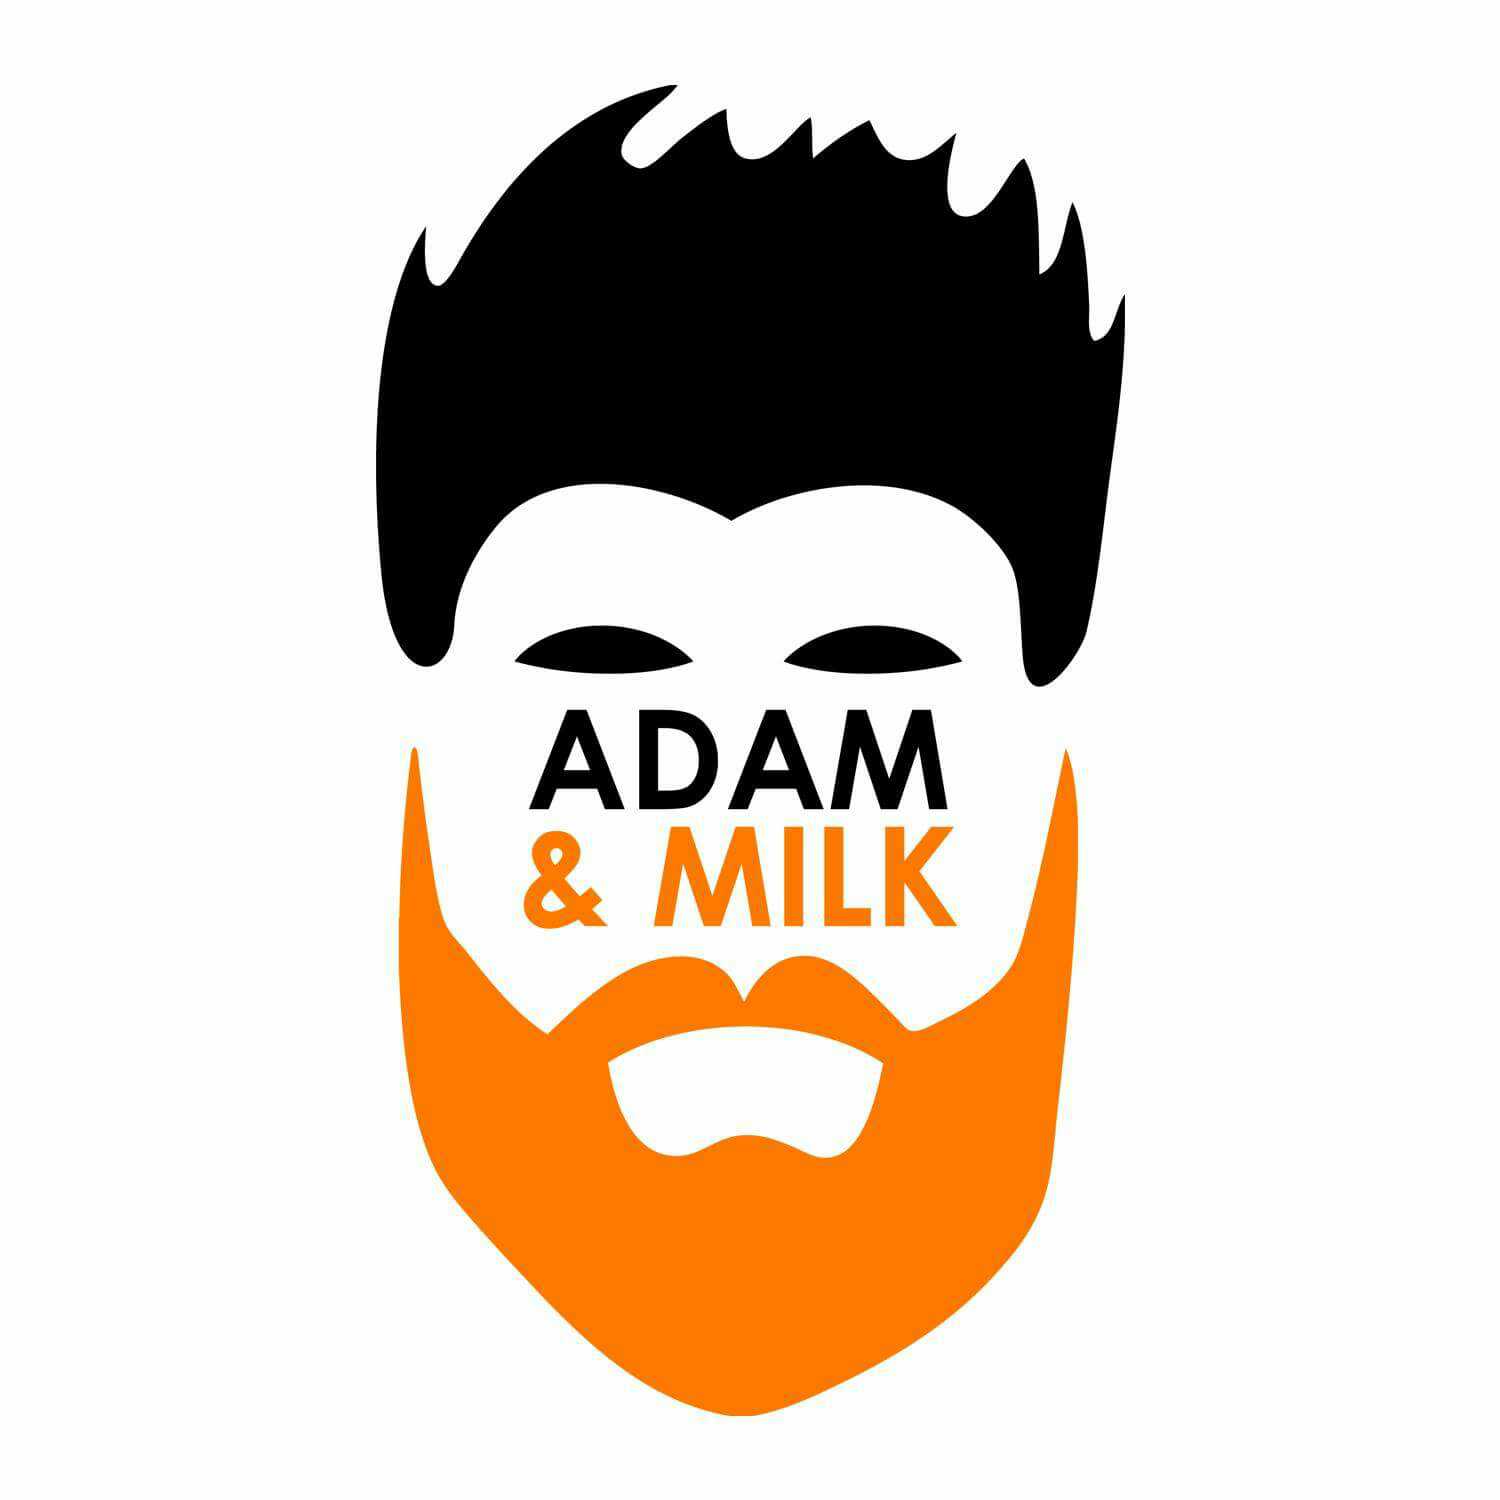 036 - Switched on blokes - Unpleasant with Adam and Milk